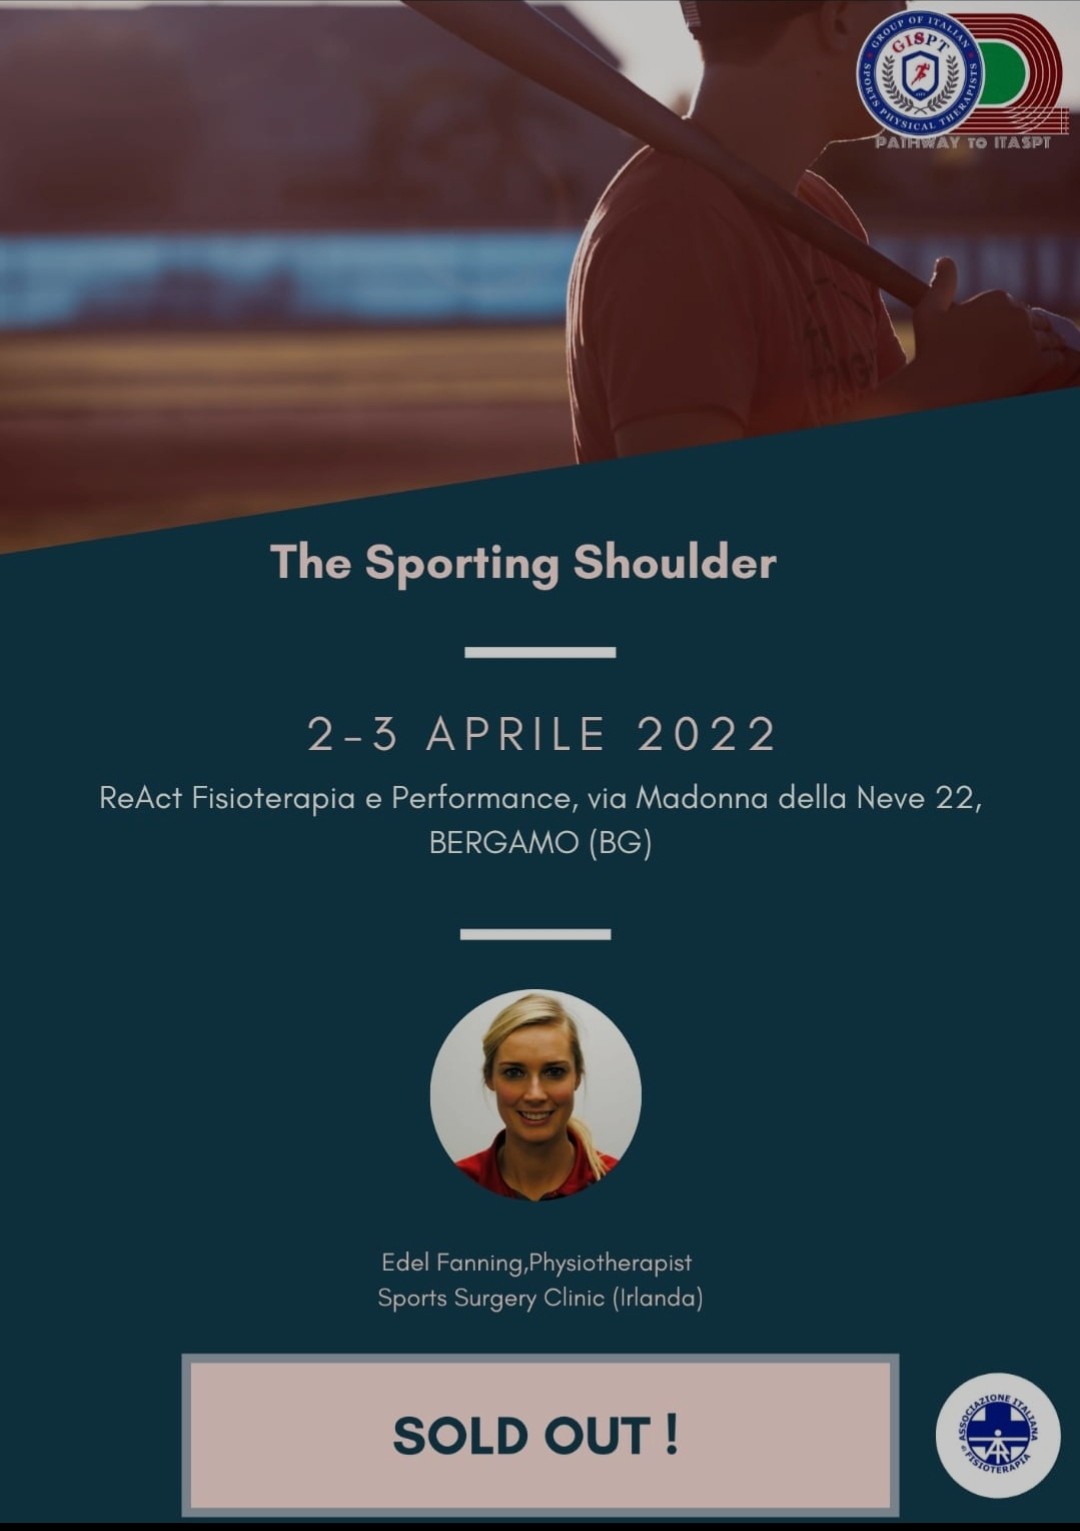 Corso “the sporting shoulder” SOLD OUT